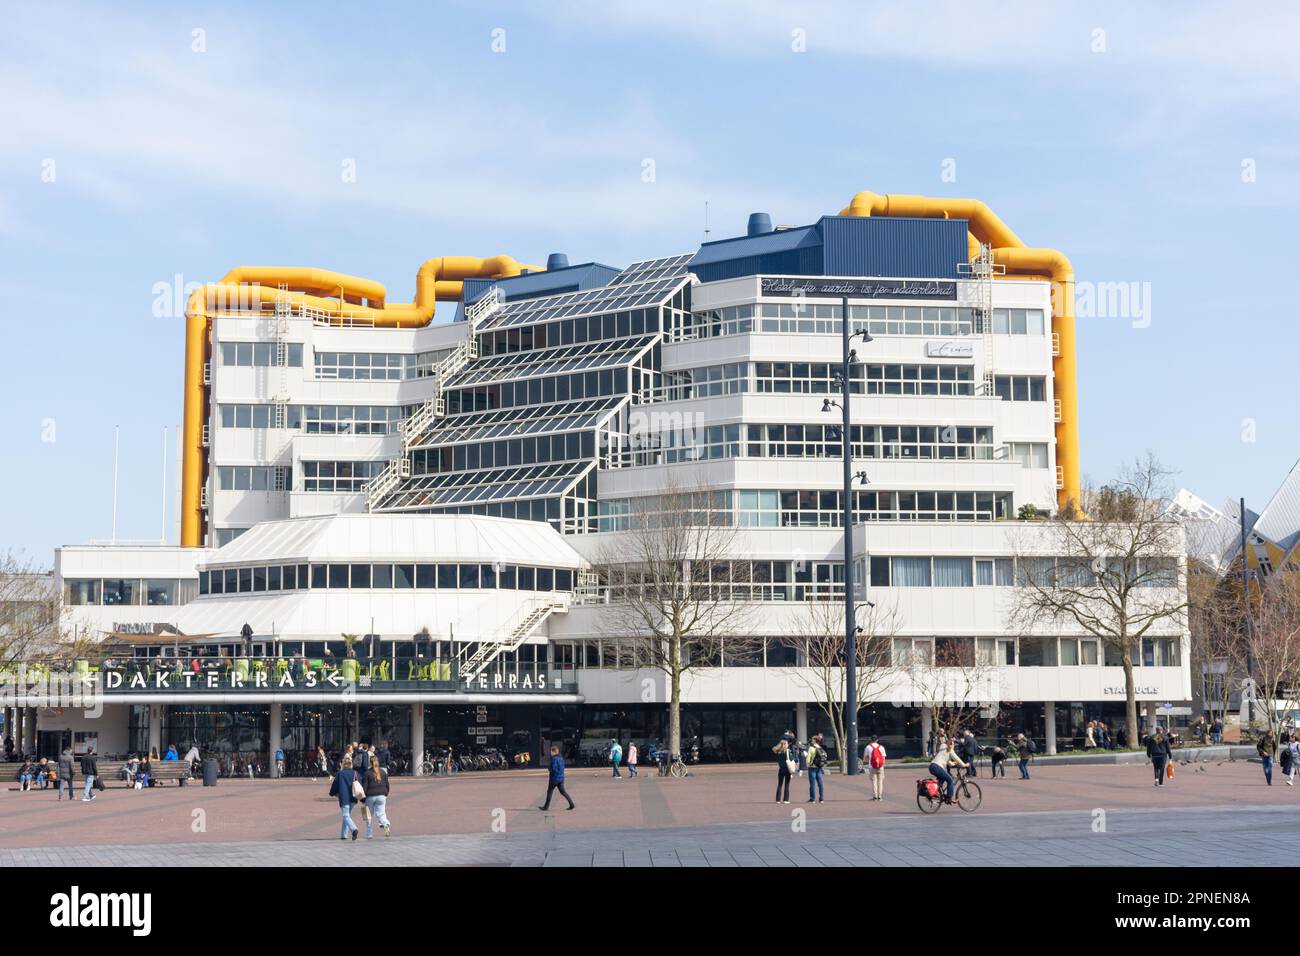 Centrale Bibliotheek Rotterdam (Rotterdam Central Library), Hoogstraat, Stadsdriehoek, Rotterdam, South Holland Province, Kingdom of the Netherlands Stock Photo